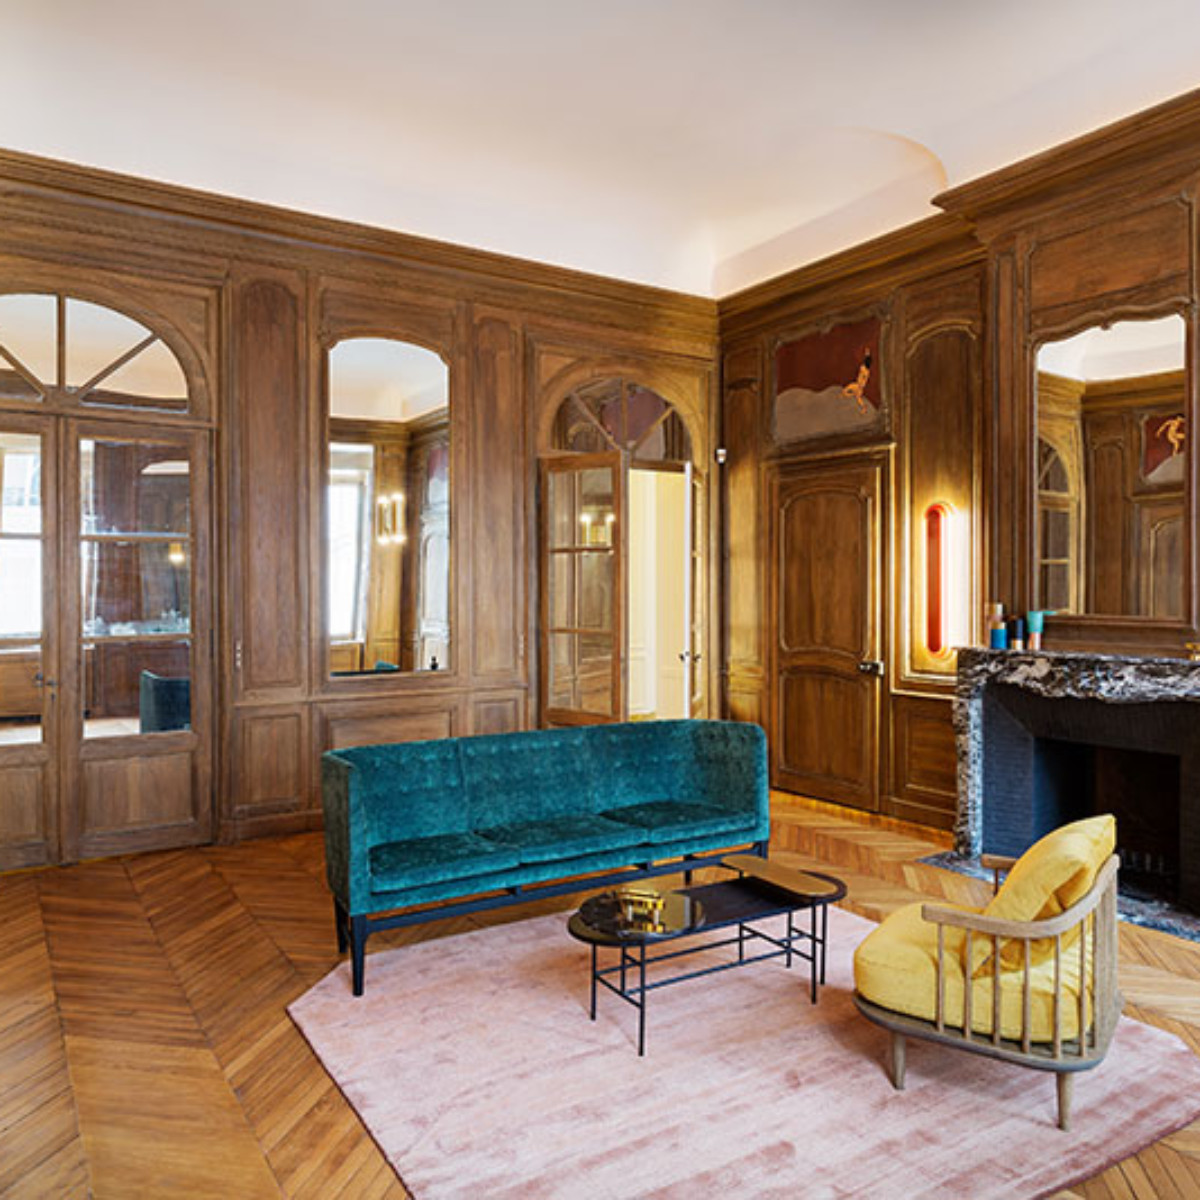 A Look Inside Coco Chanel's Apartment